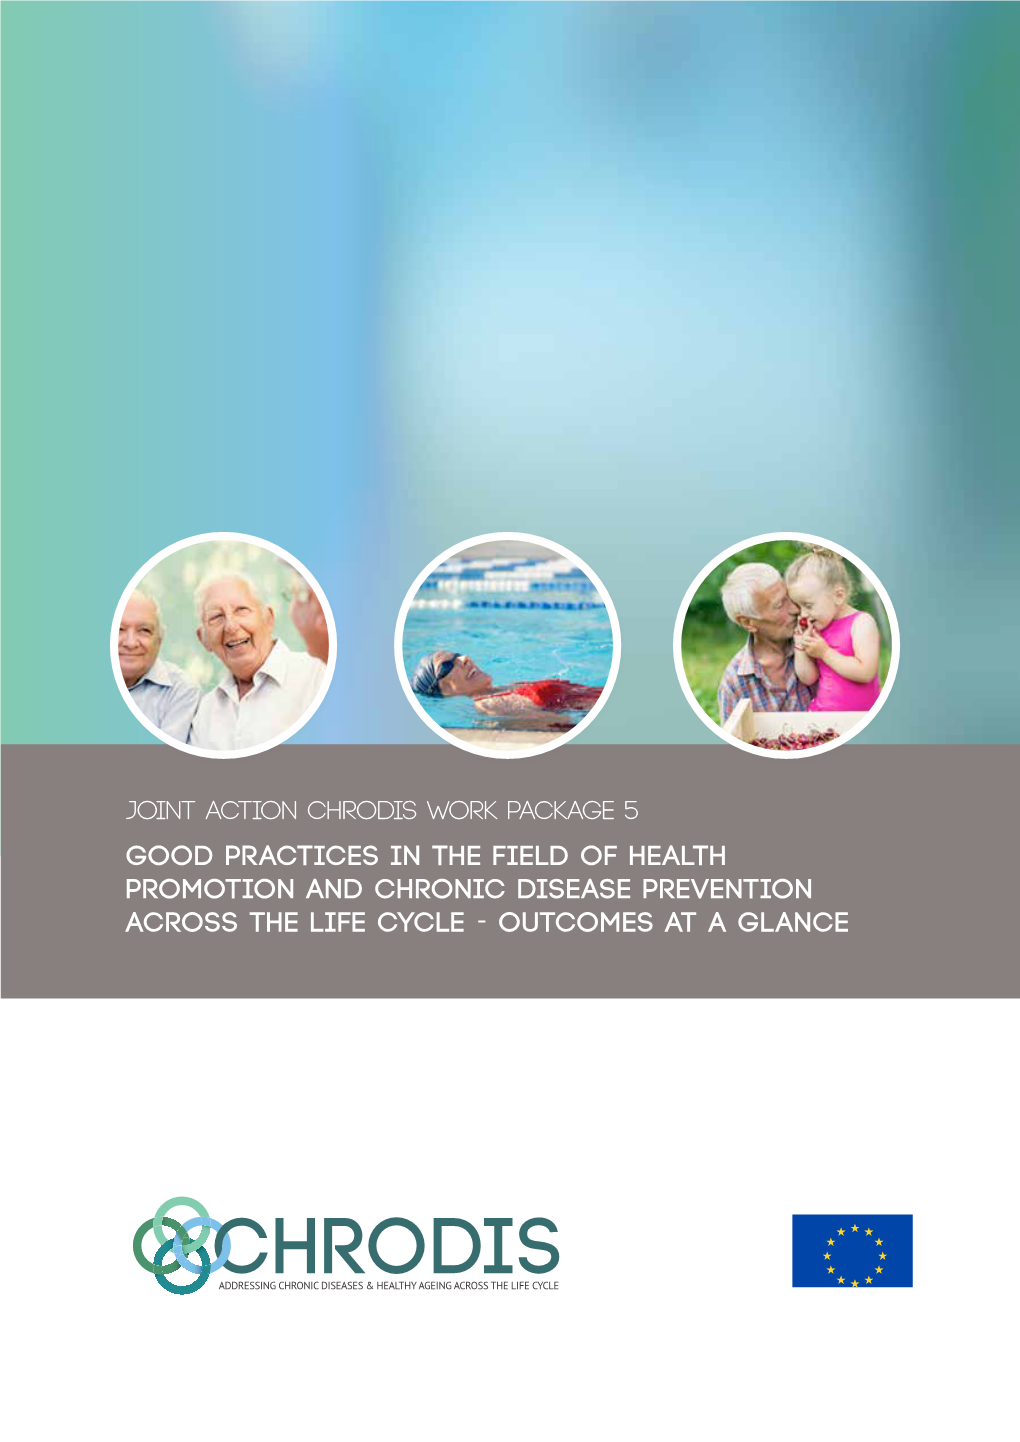 Good Practices in Health Promotion and Disease Prevention